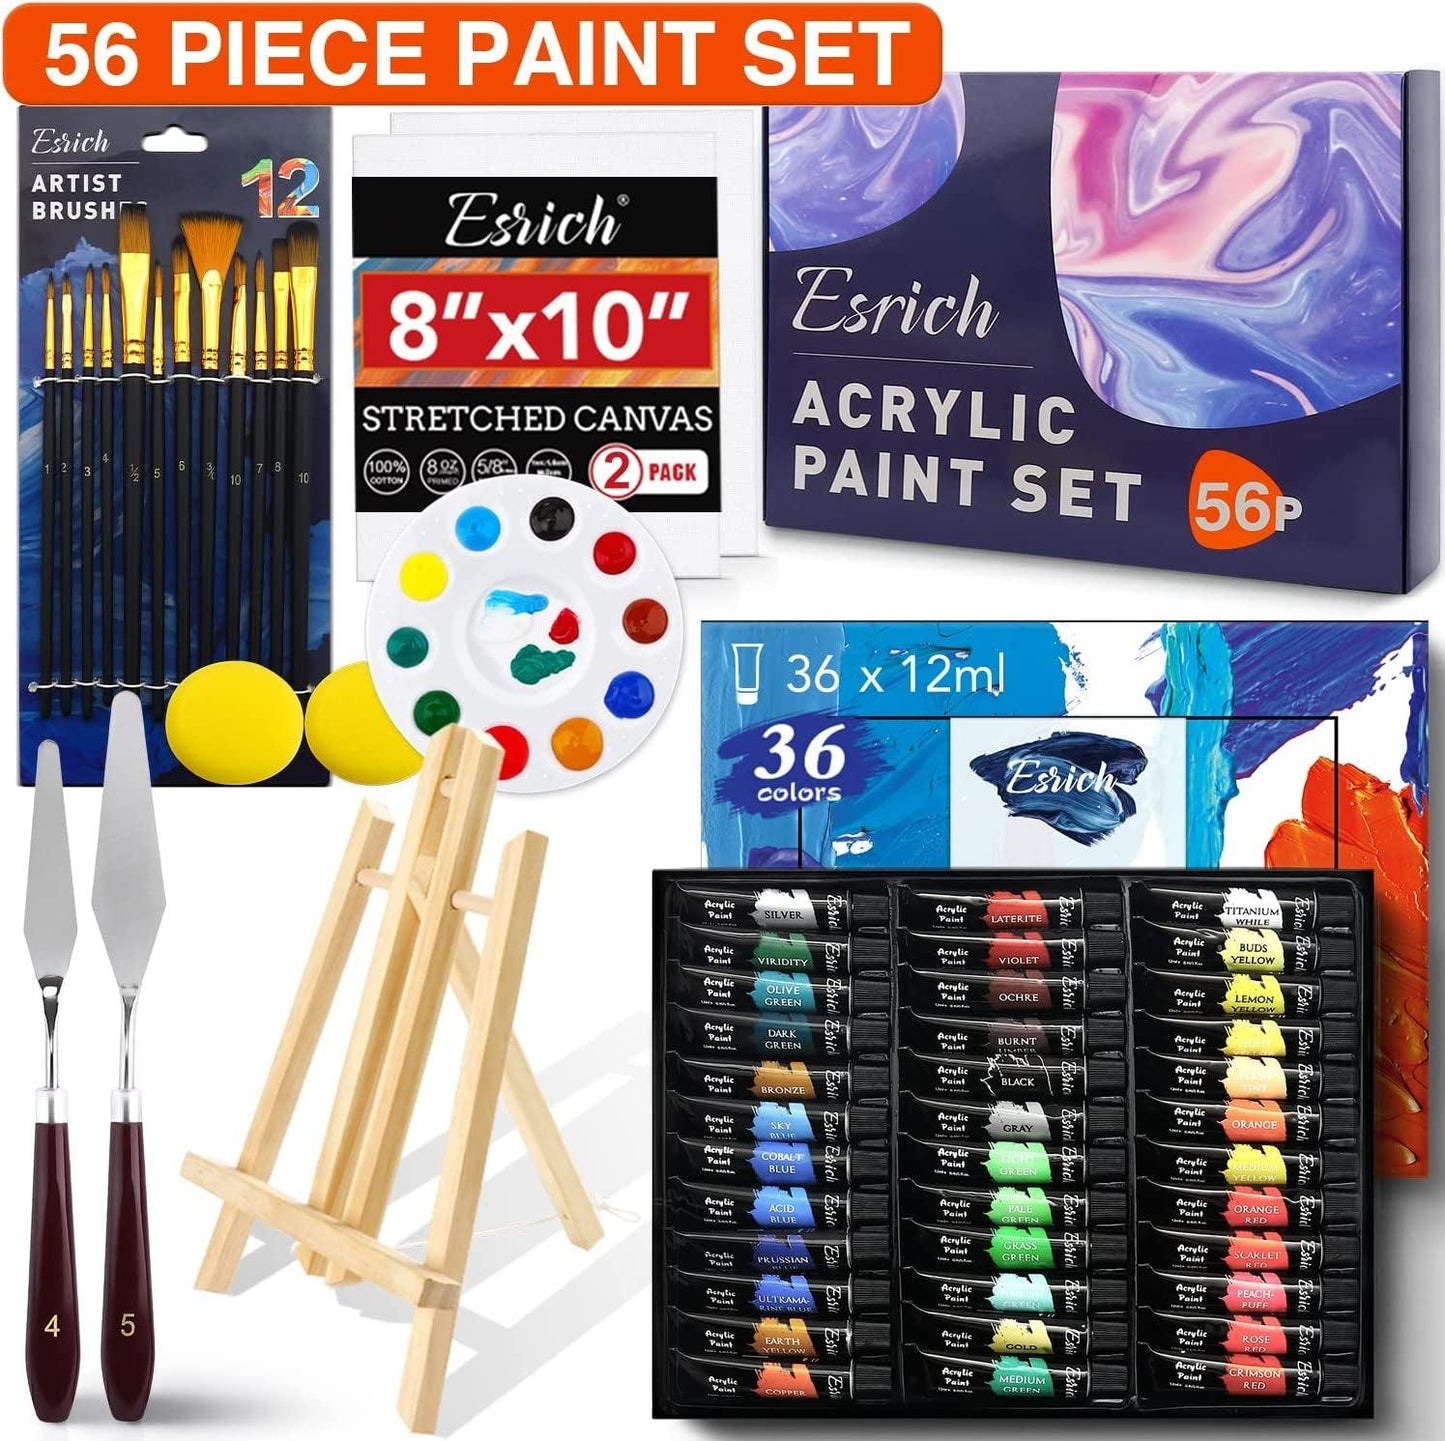 Acrylic Paint Set,56 PCS with Paint Brushes, 36 Colors Acrylic Paints, 1 Easel, 2 Painting Canvases, Palette, Paint Knives and Art Sponges - WoodArtSupply